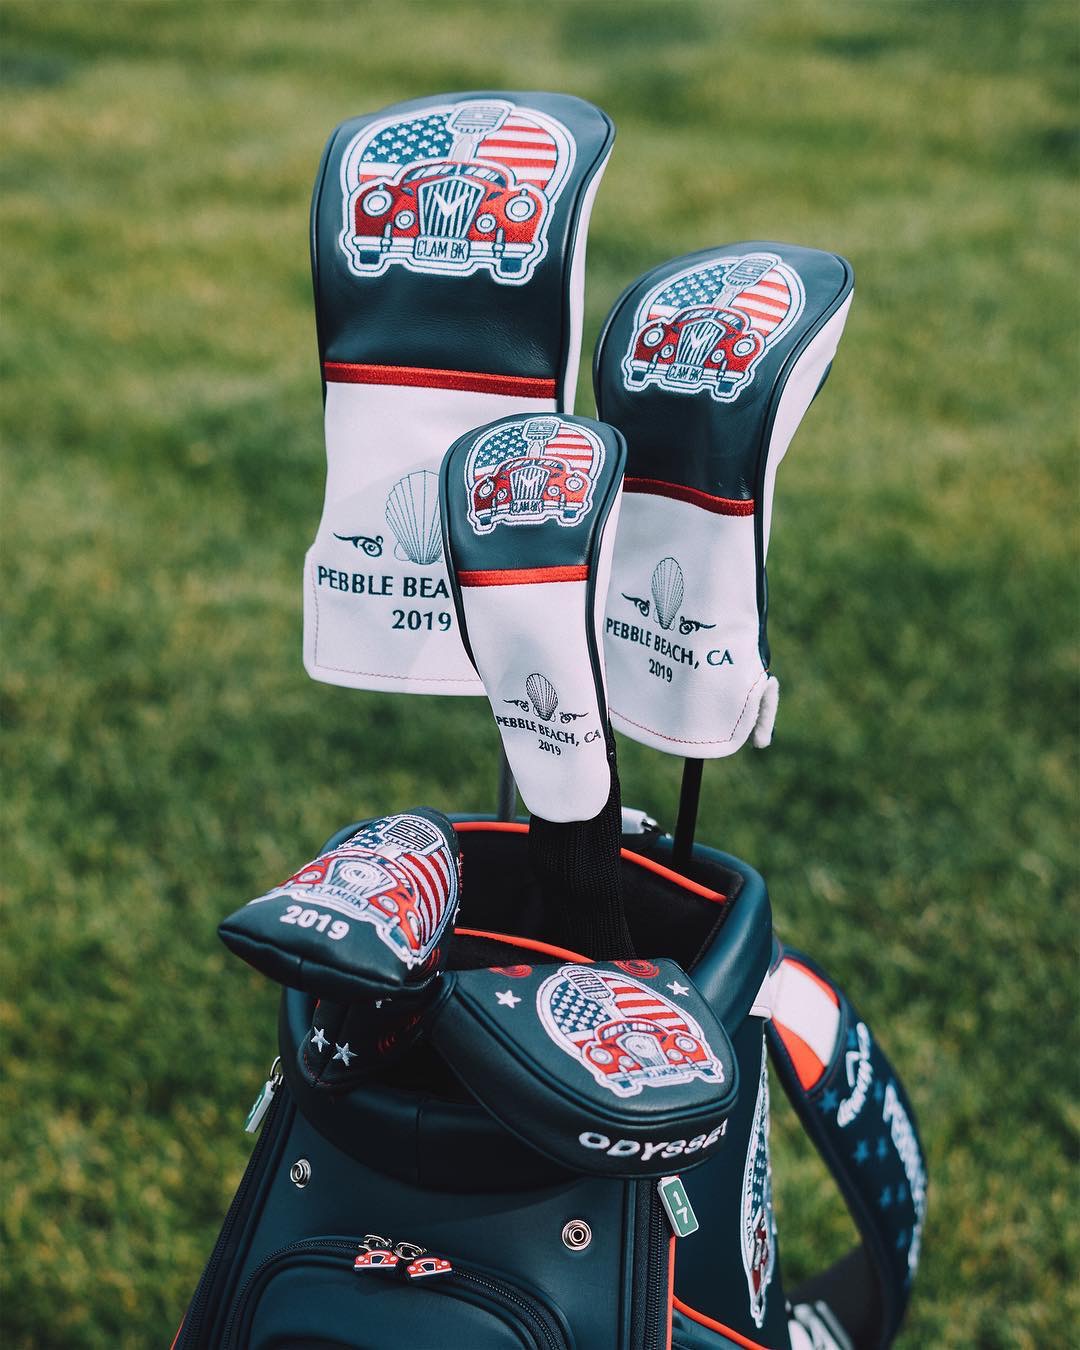 WIN! Callaway 2019 US Open limited edition Tour bag, with headcovers